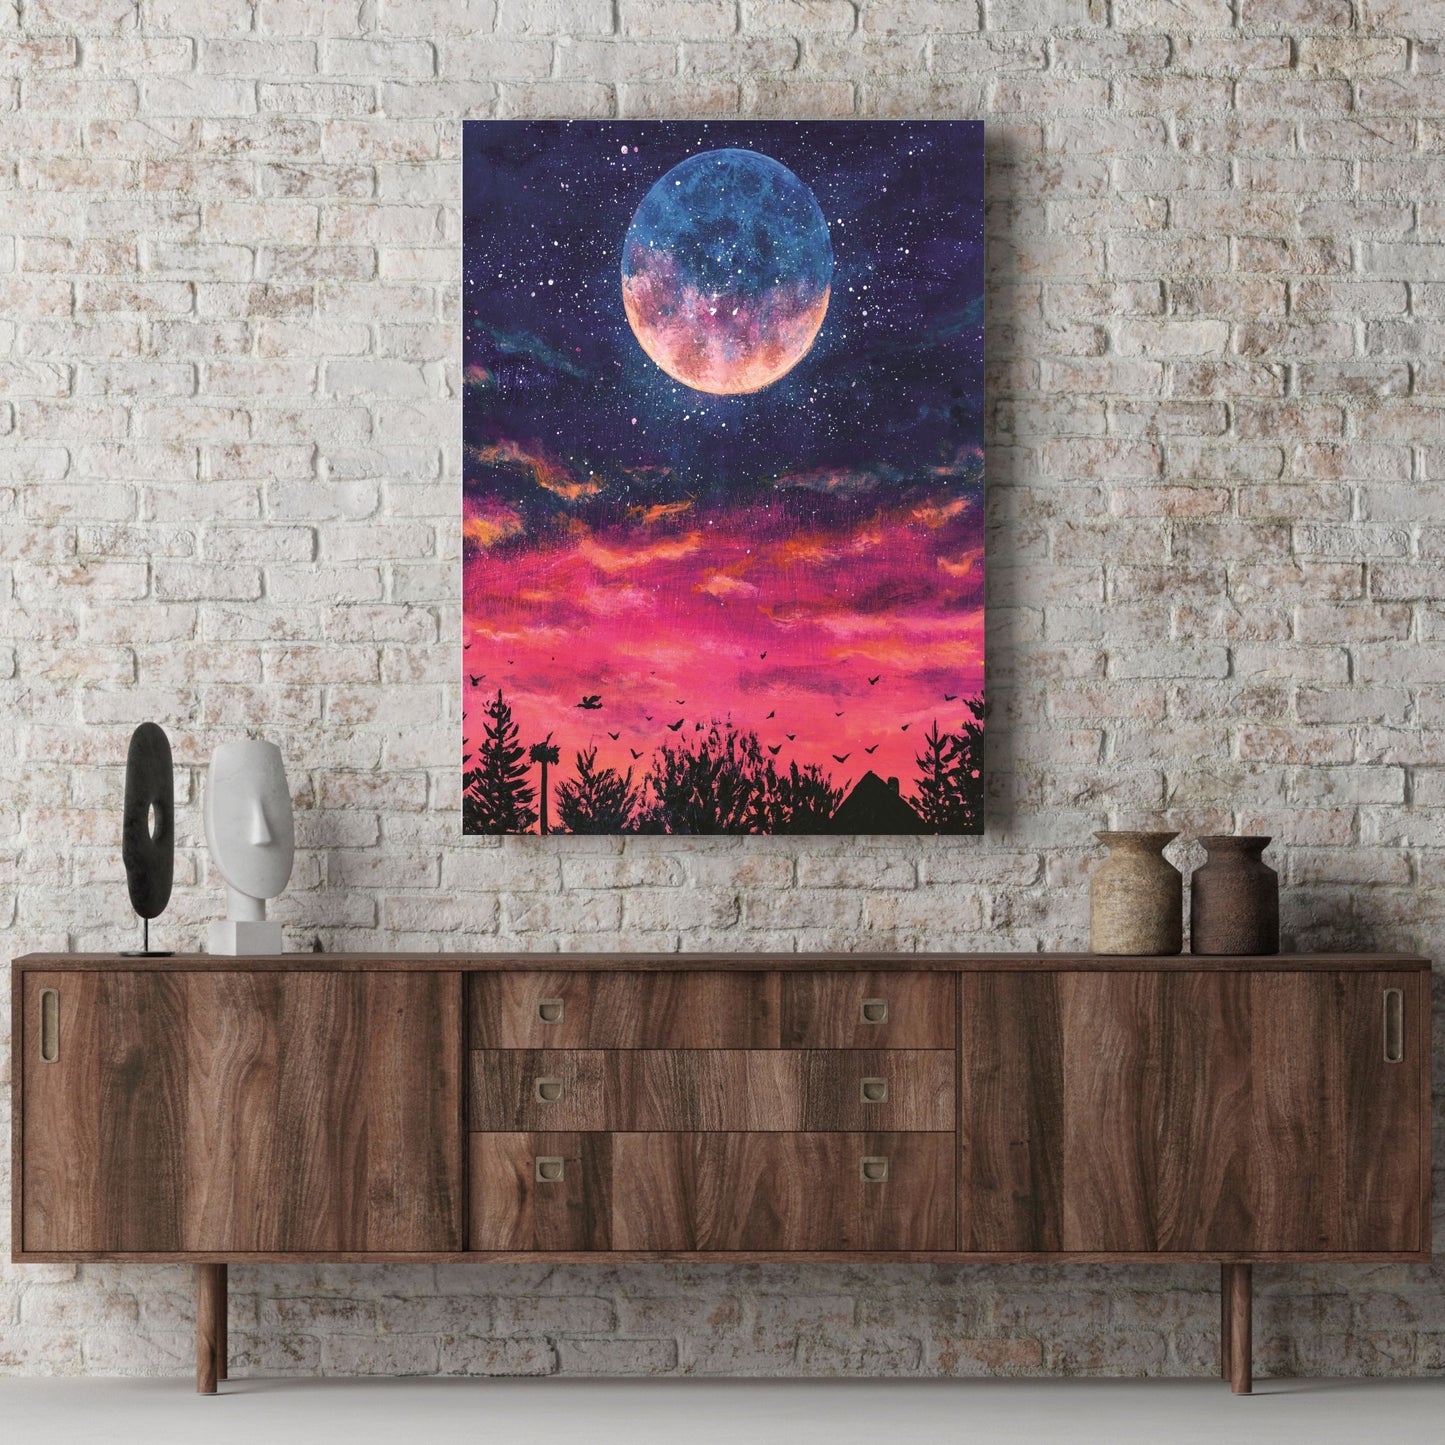 Fantastic oil painting big planet moon over the night city